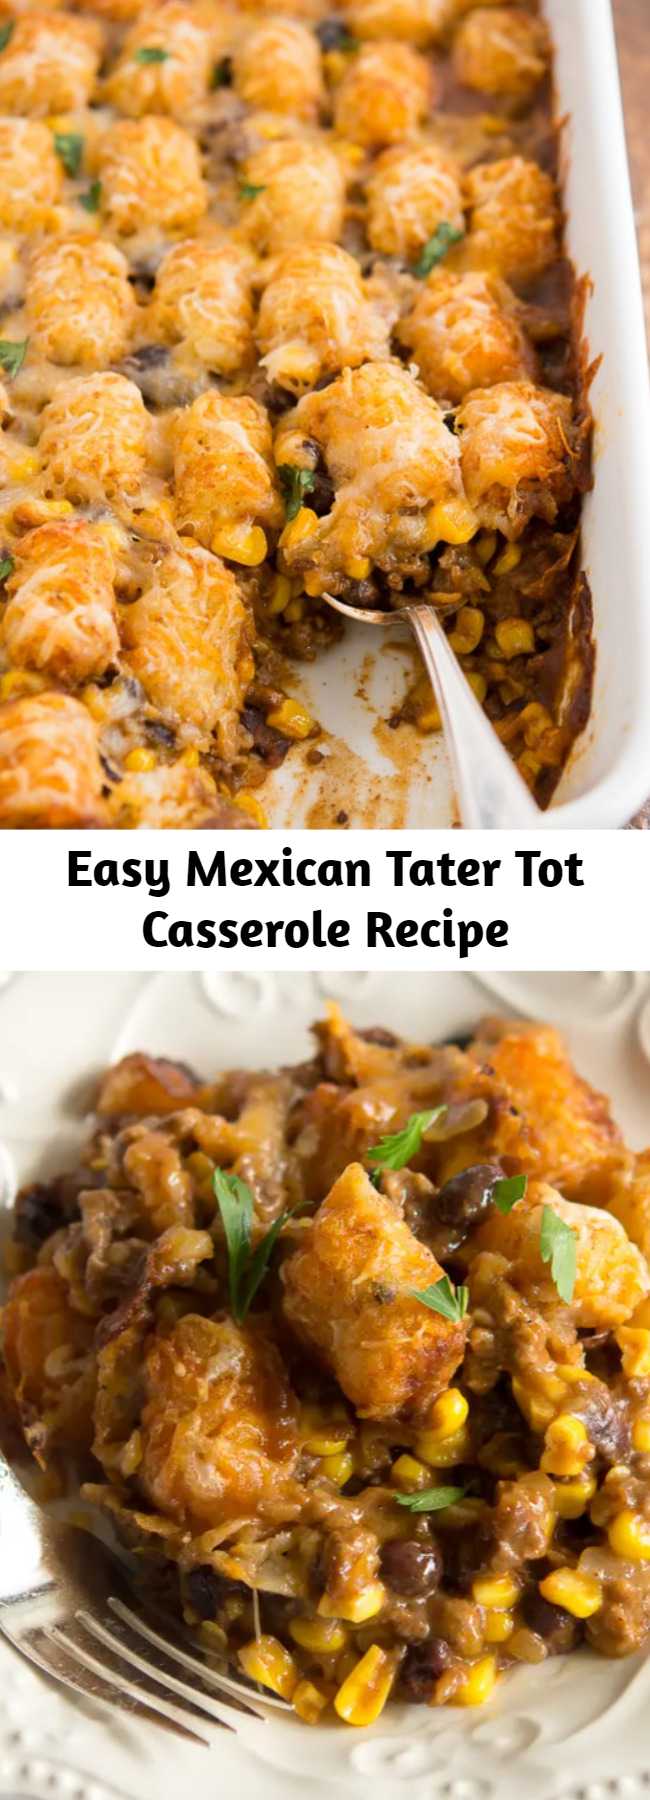 Easy Mexican Tater Tot Casserole Recipe - This easy tater tot casserole will please everyone in your crew---even picky kids! This delicious taco-inspired tater tot casserole recipe is chock-full of black beans, corn, ground beef and a whole lot of flavor.